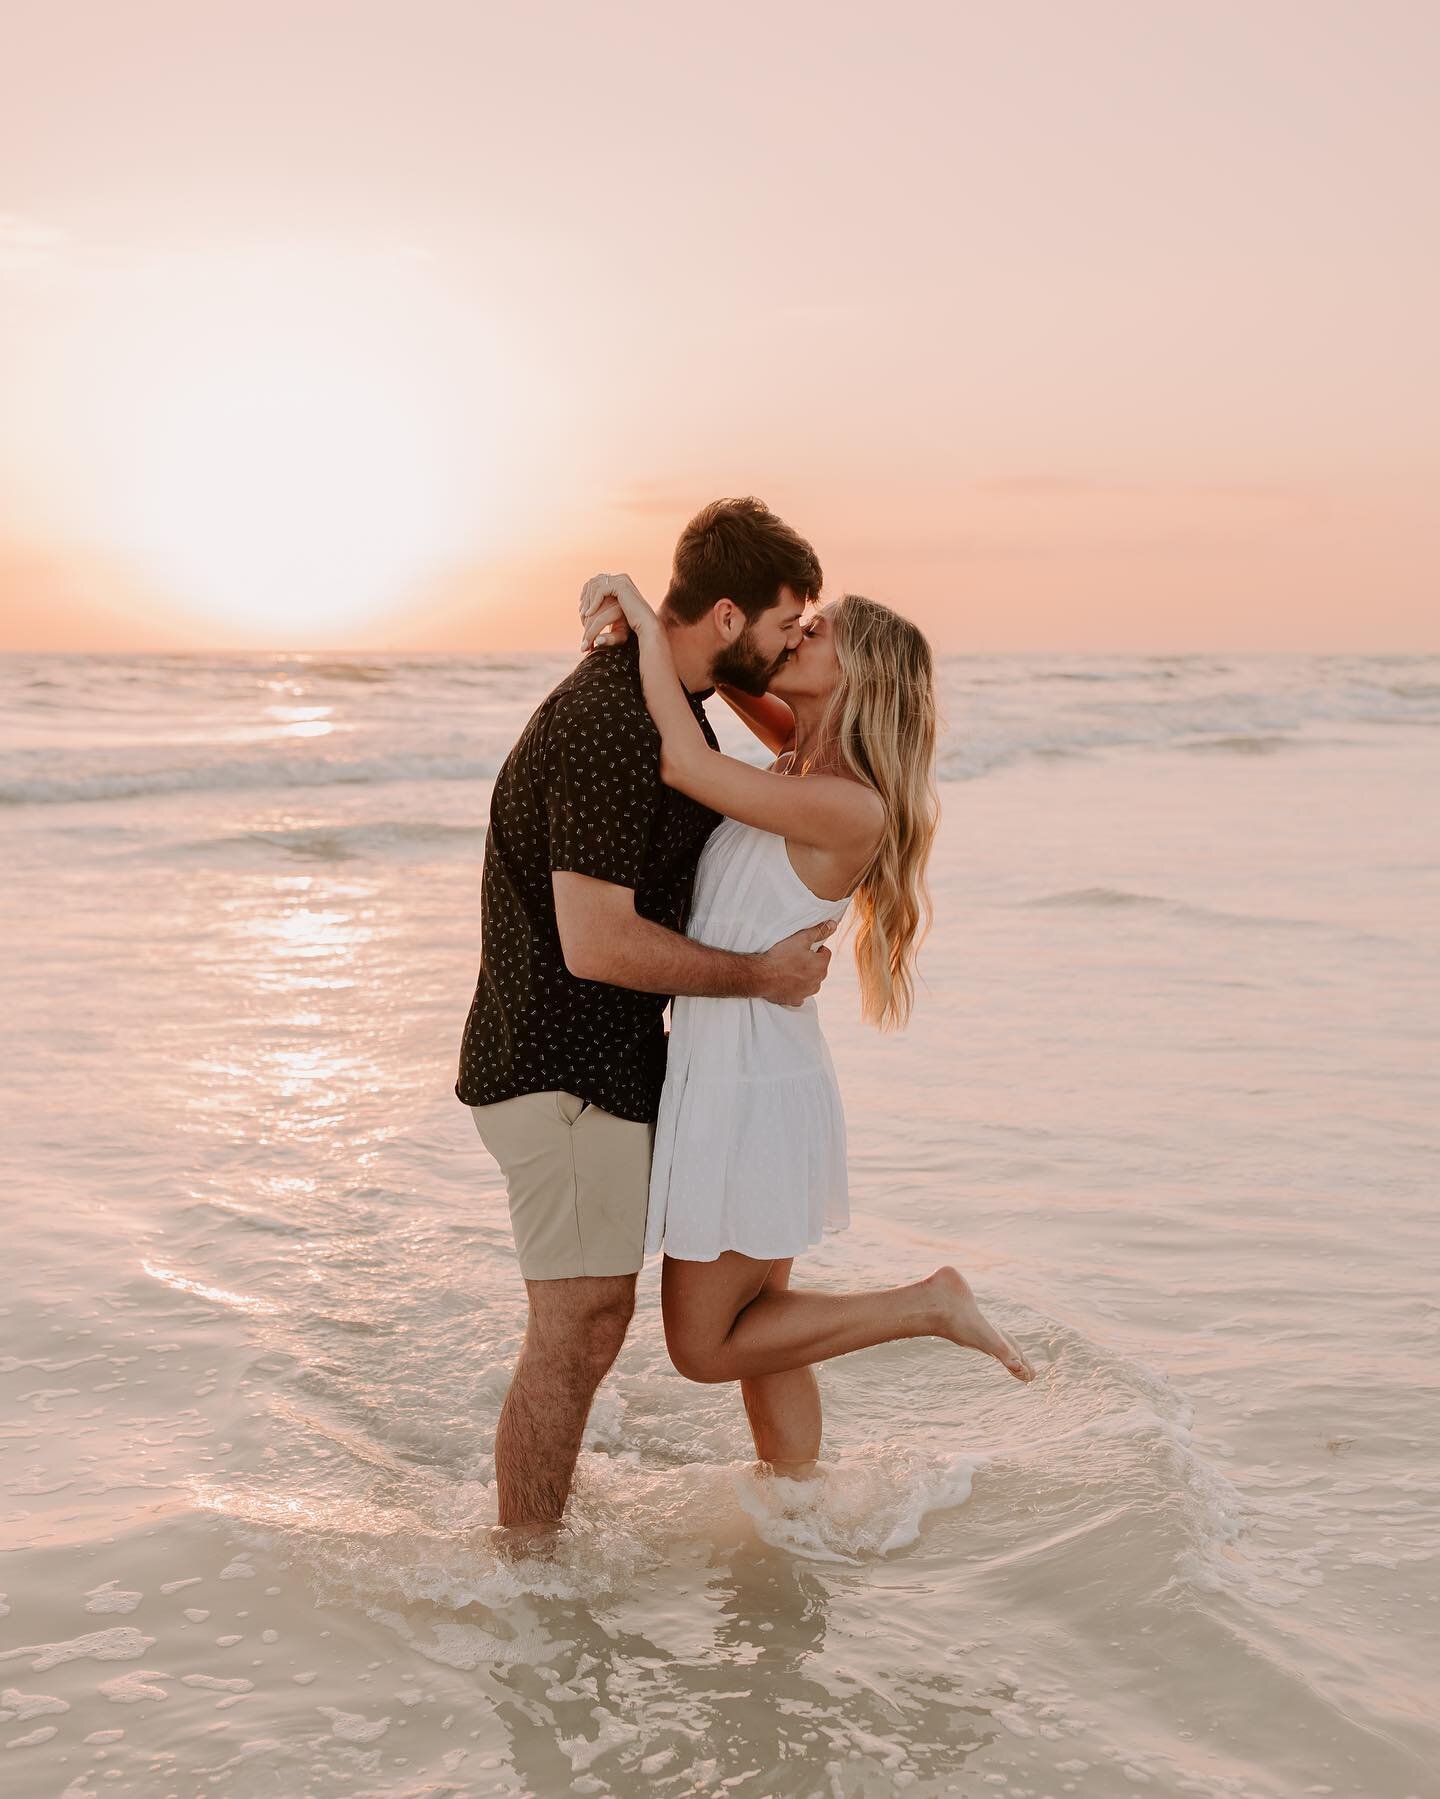 sunset engagement sessions feel so romantic, right!?